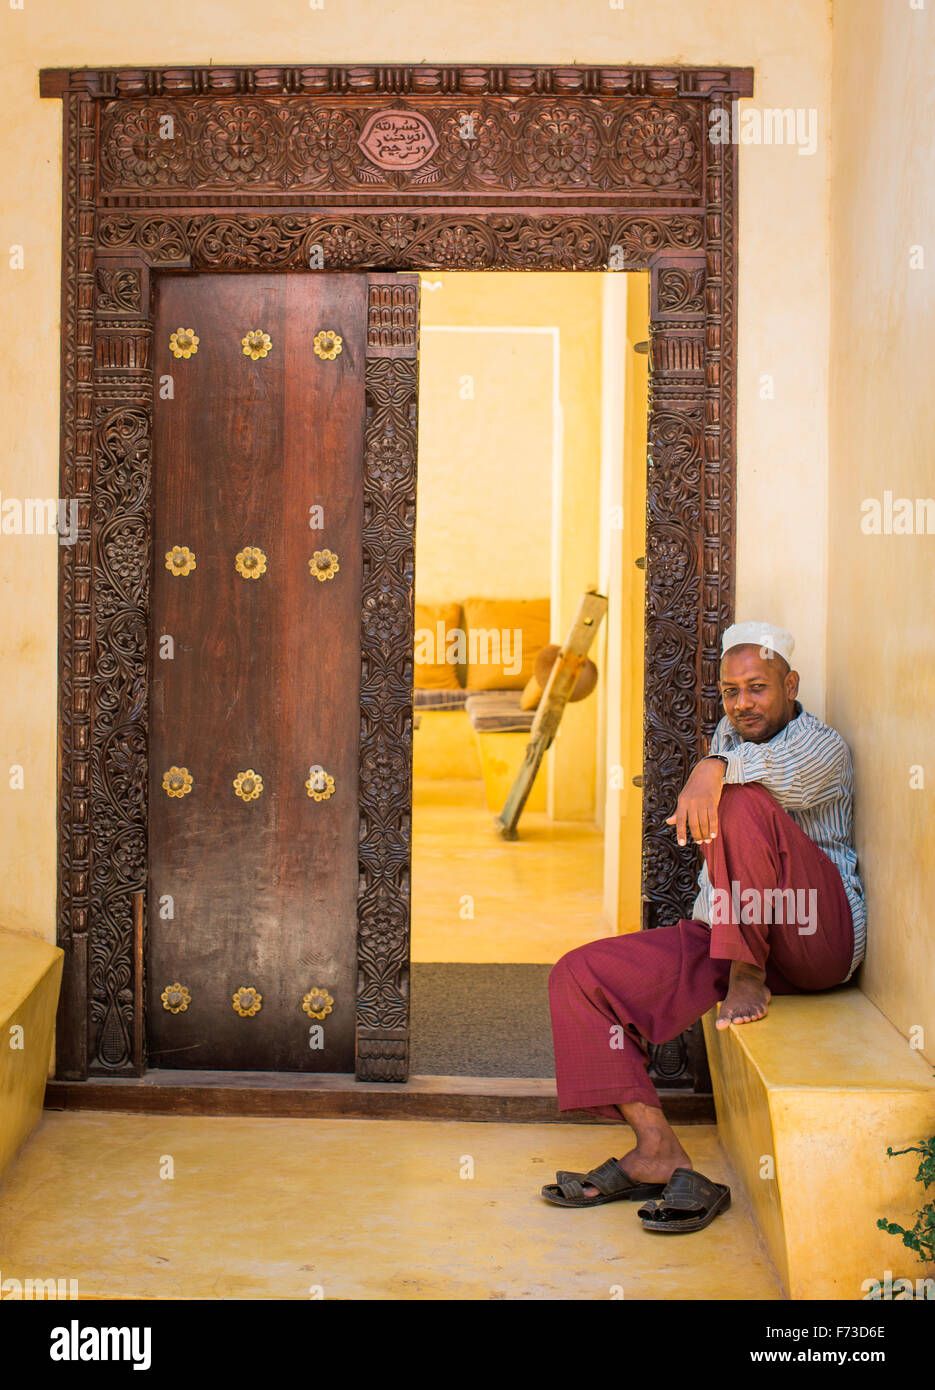 LAMU, KENYA, AFRICA. A man in traditional Arab dress sits on a becnh outside an antique carved-wood door. Stock Photo